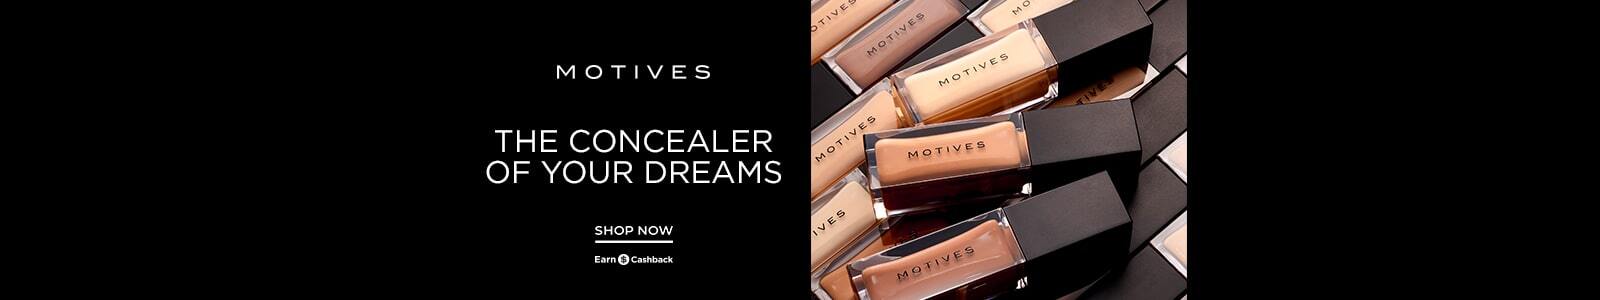 MOTIVES The Concealer of Your Dreams Shop Now